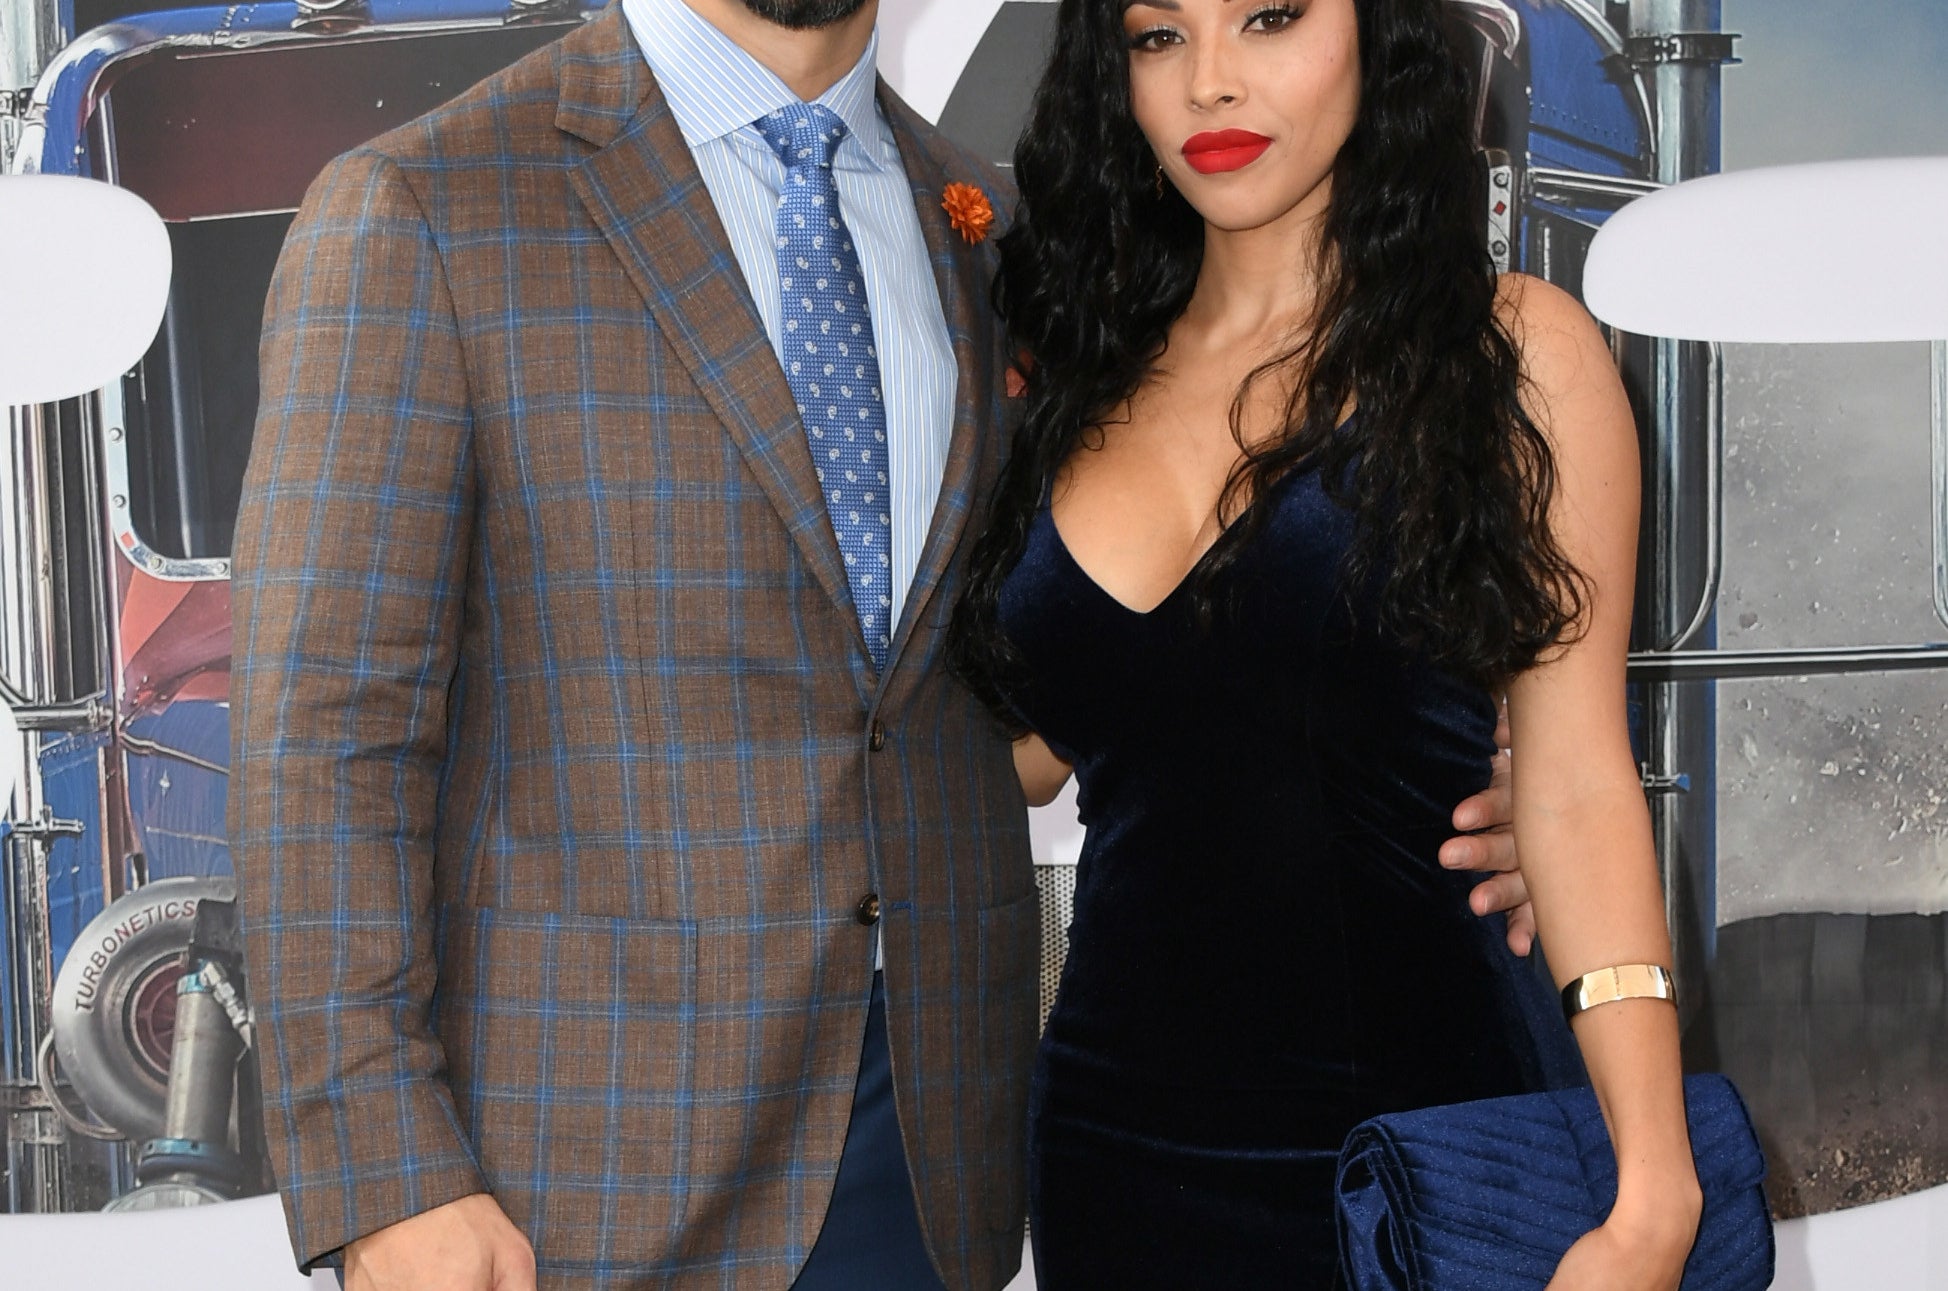 Roman Reigns and his wife Galina Becker